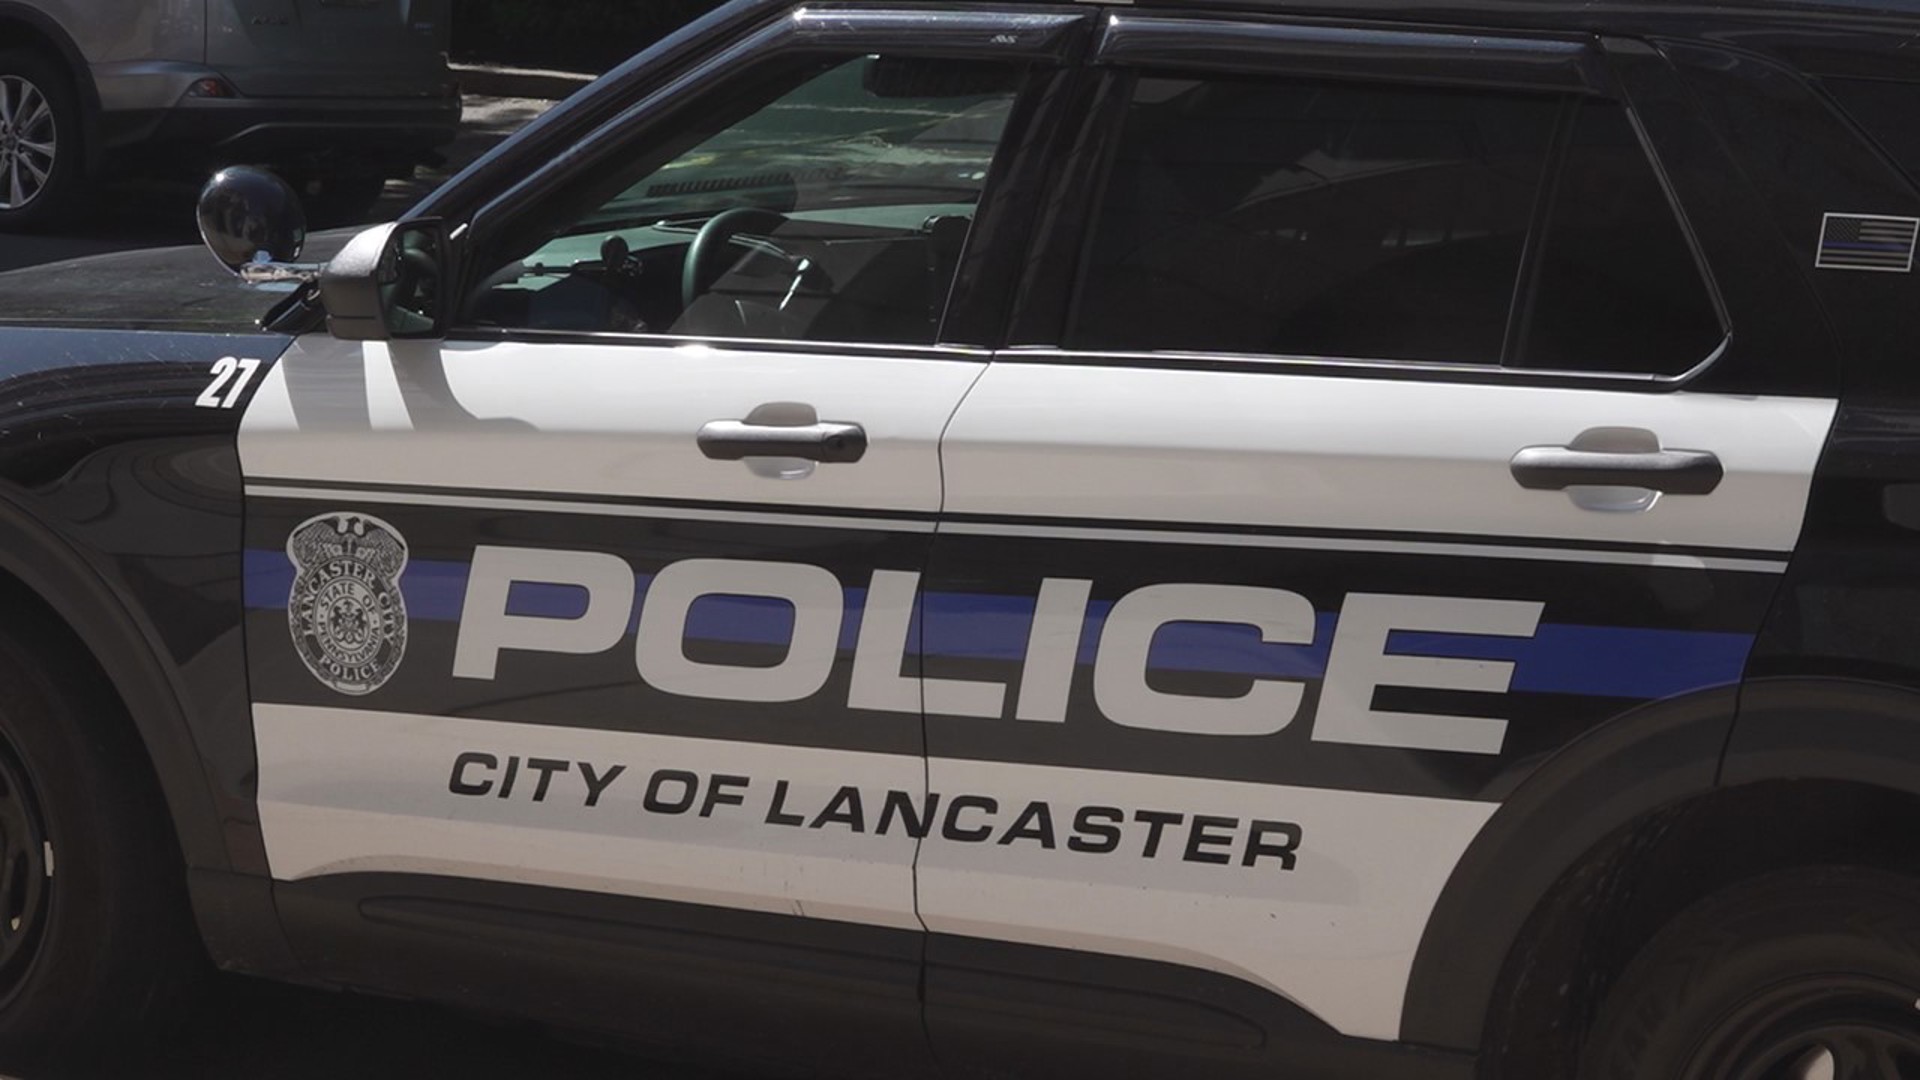 The City of Lancaster Bureau of Police is accepting applications for new officers until October 18.